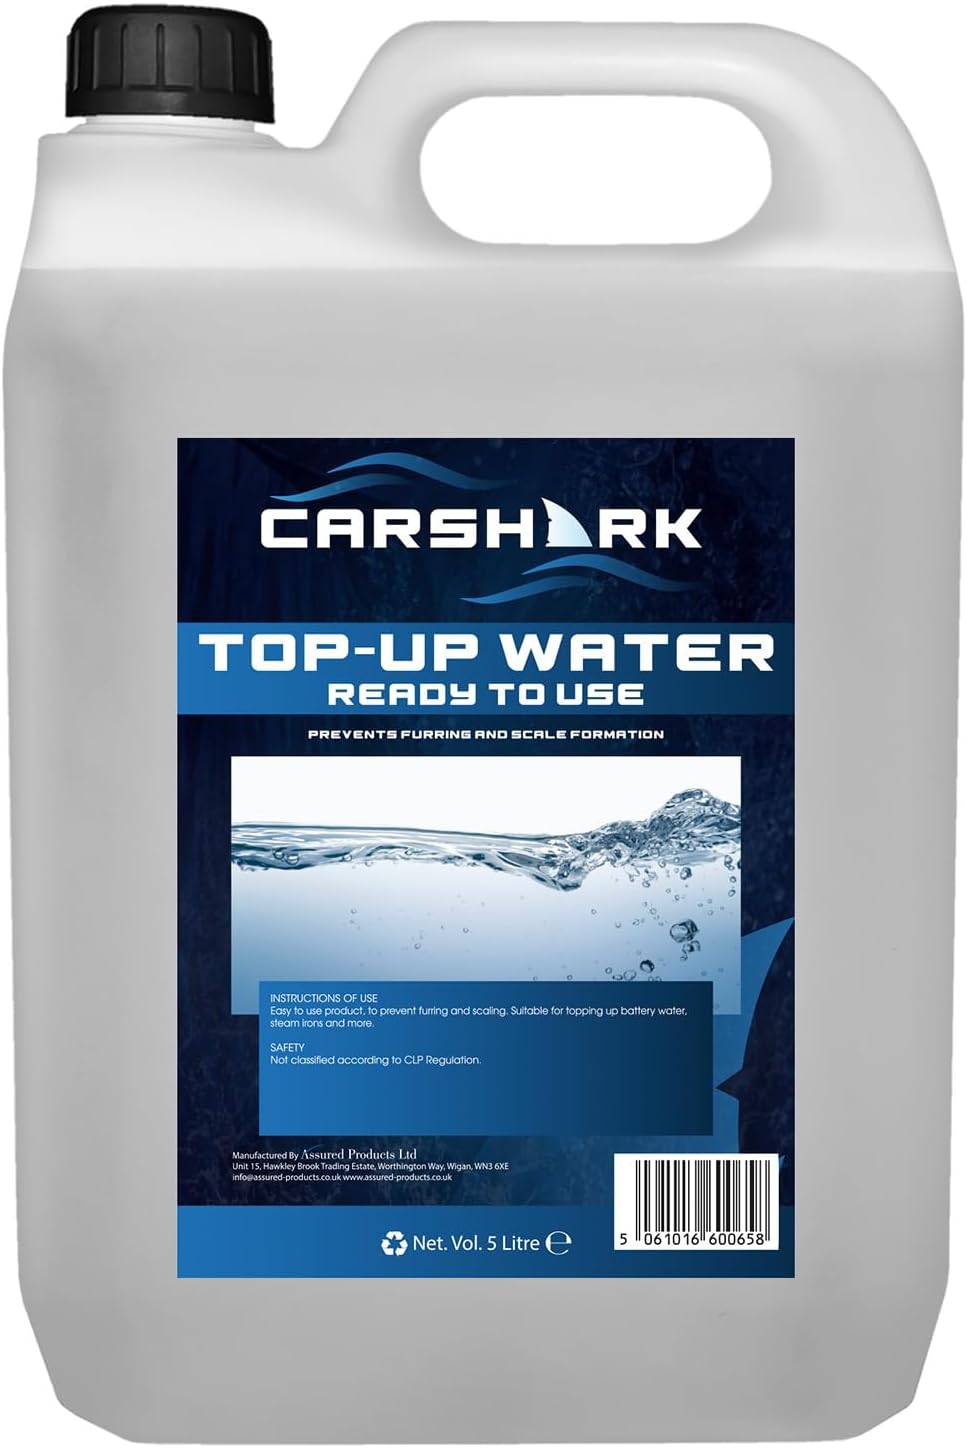 CARSHARK Top-Up Water 5L, Deionised Water